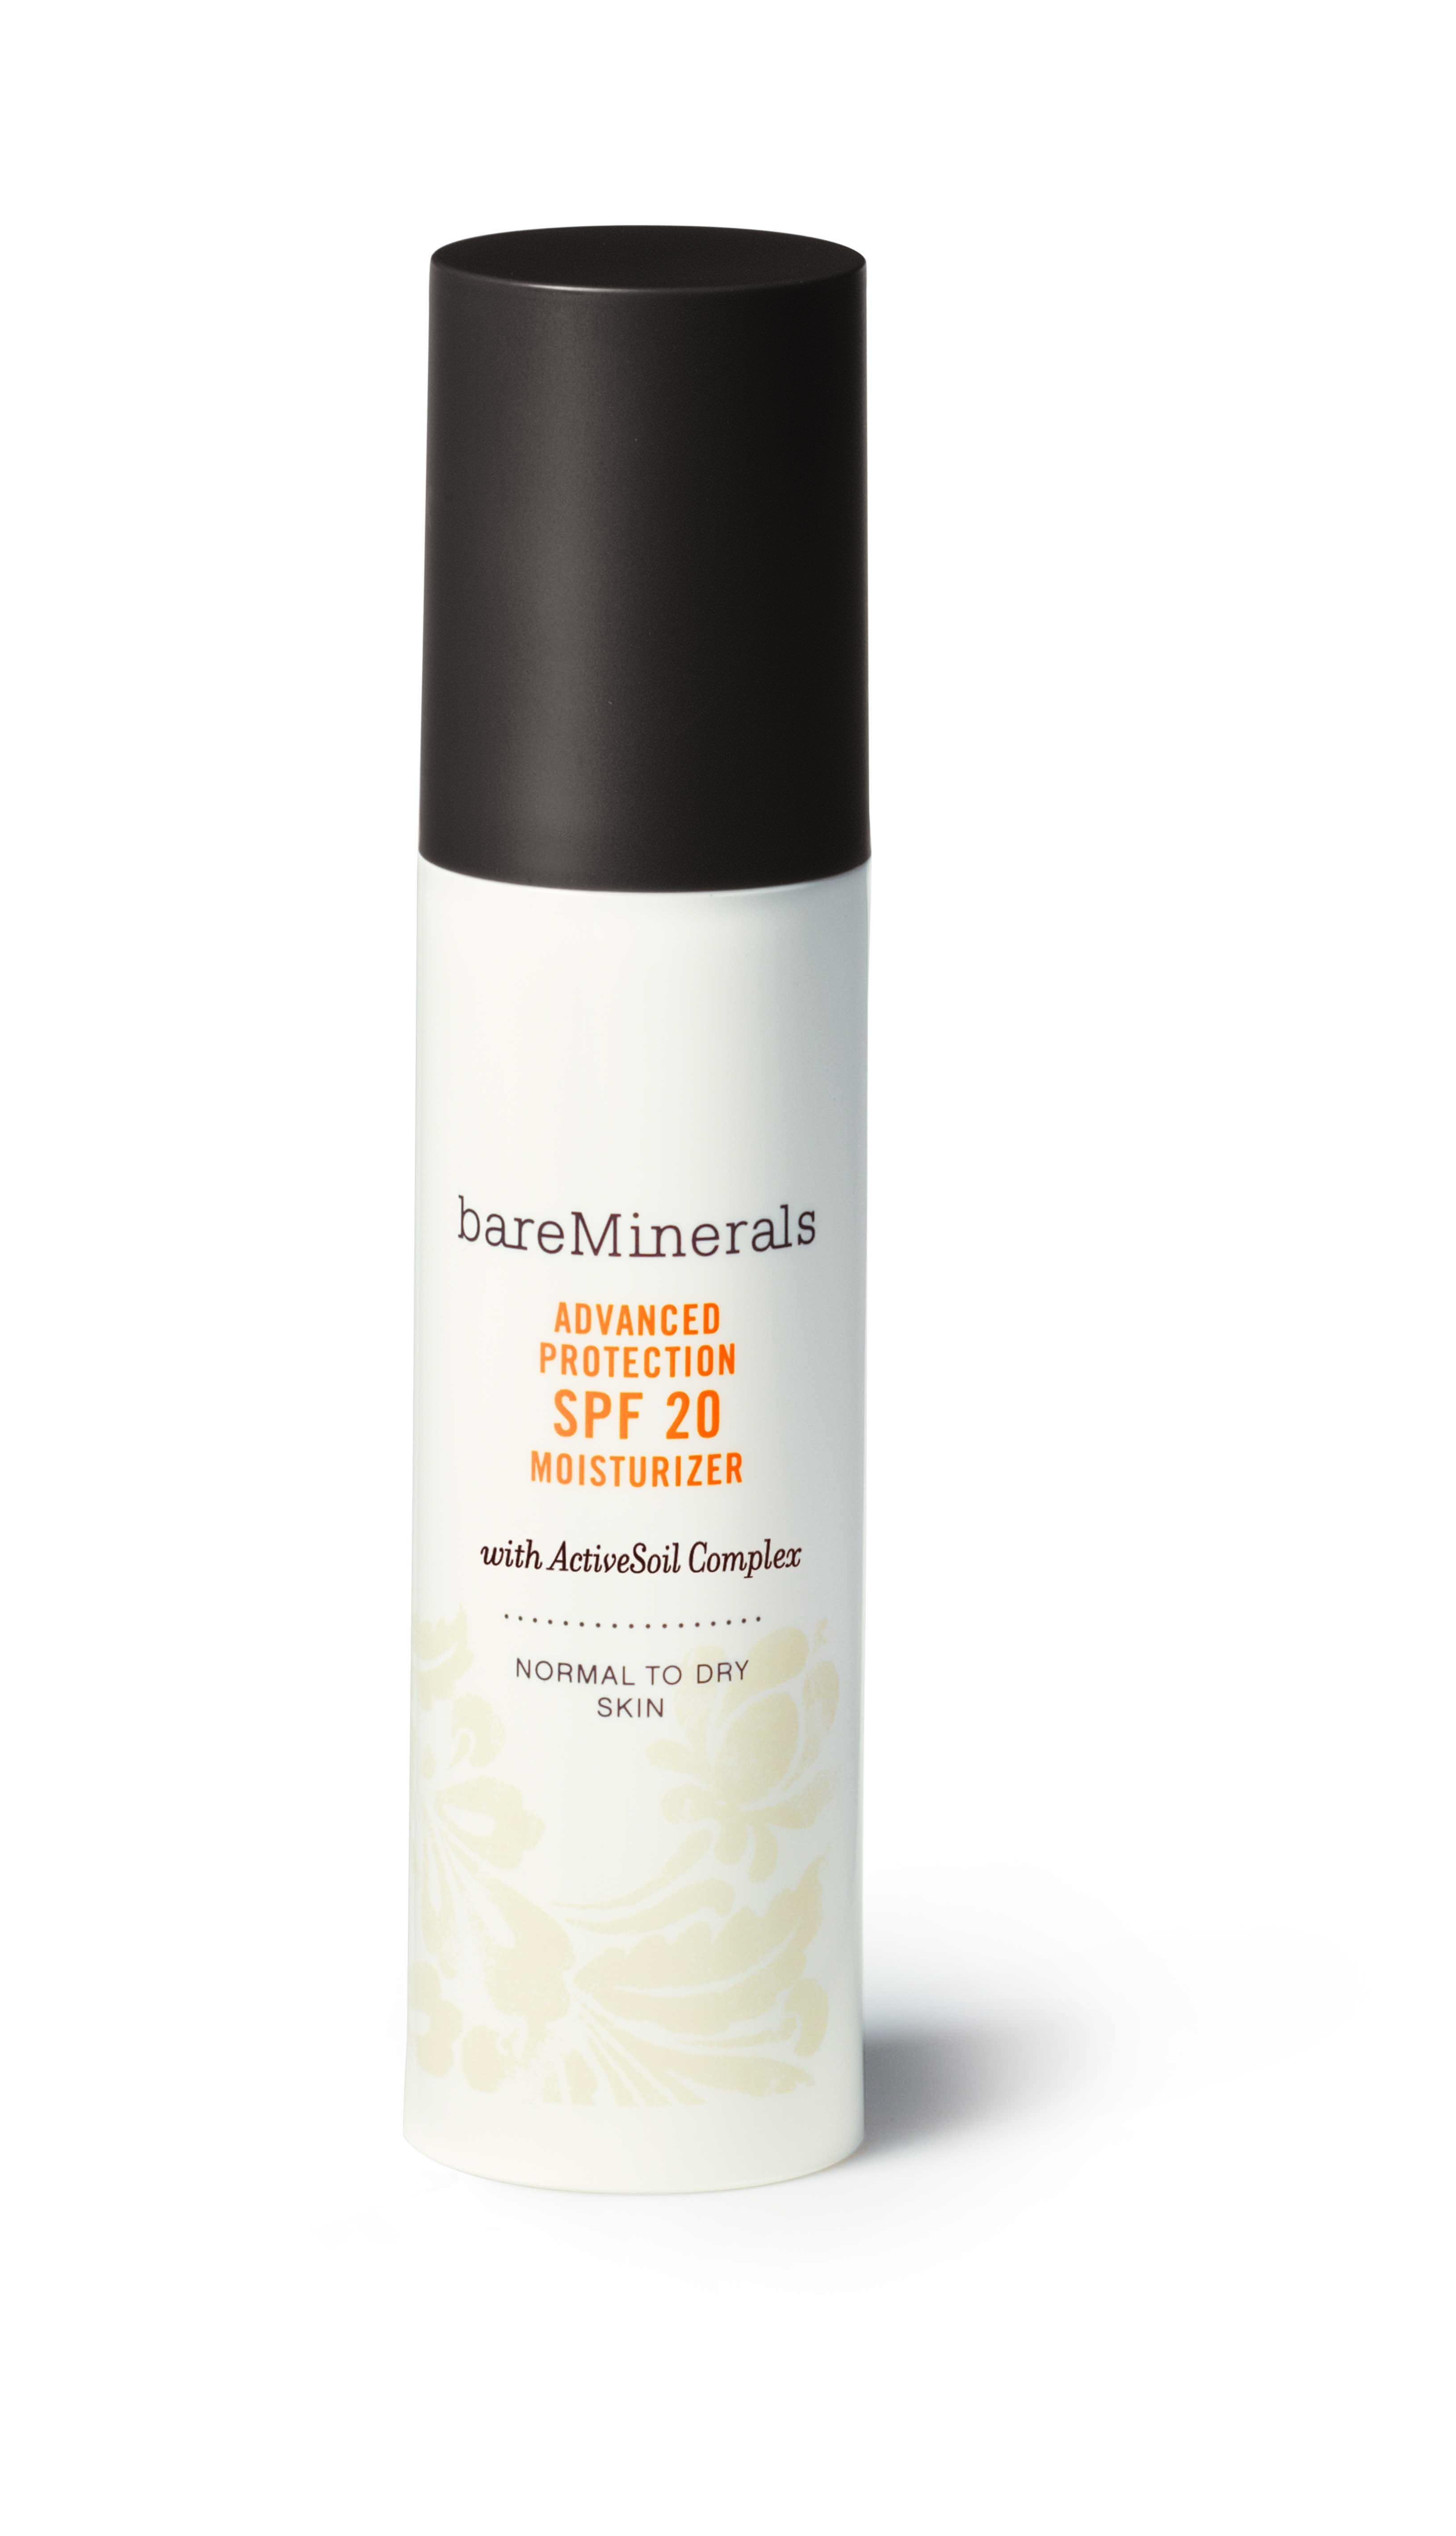 bareMinerals Advanced Protection SPF 20 Moisturizer: Normal to Dry Skin